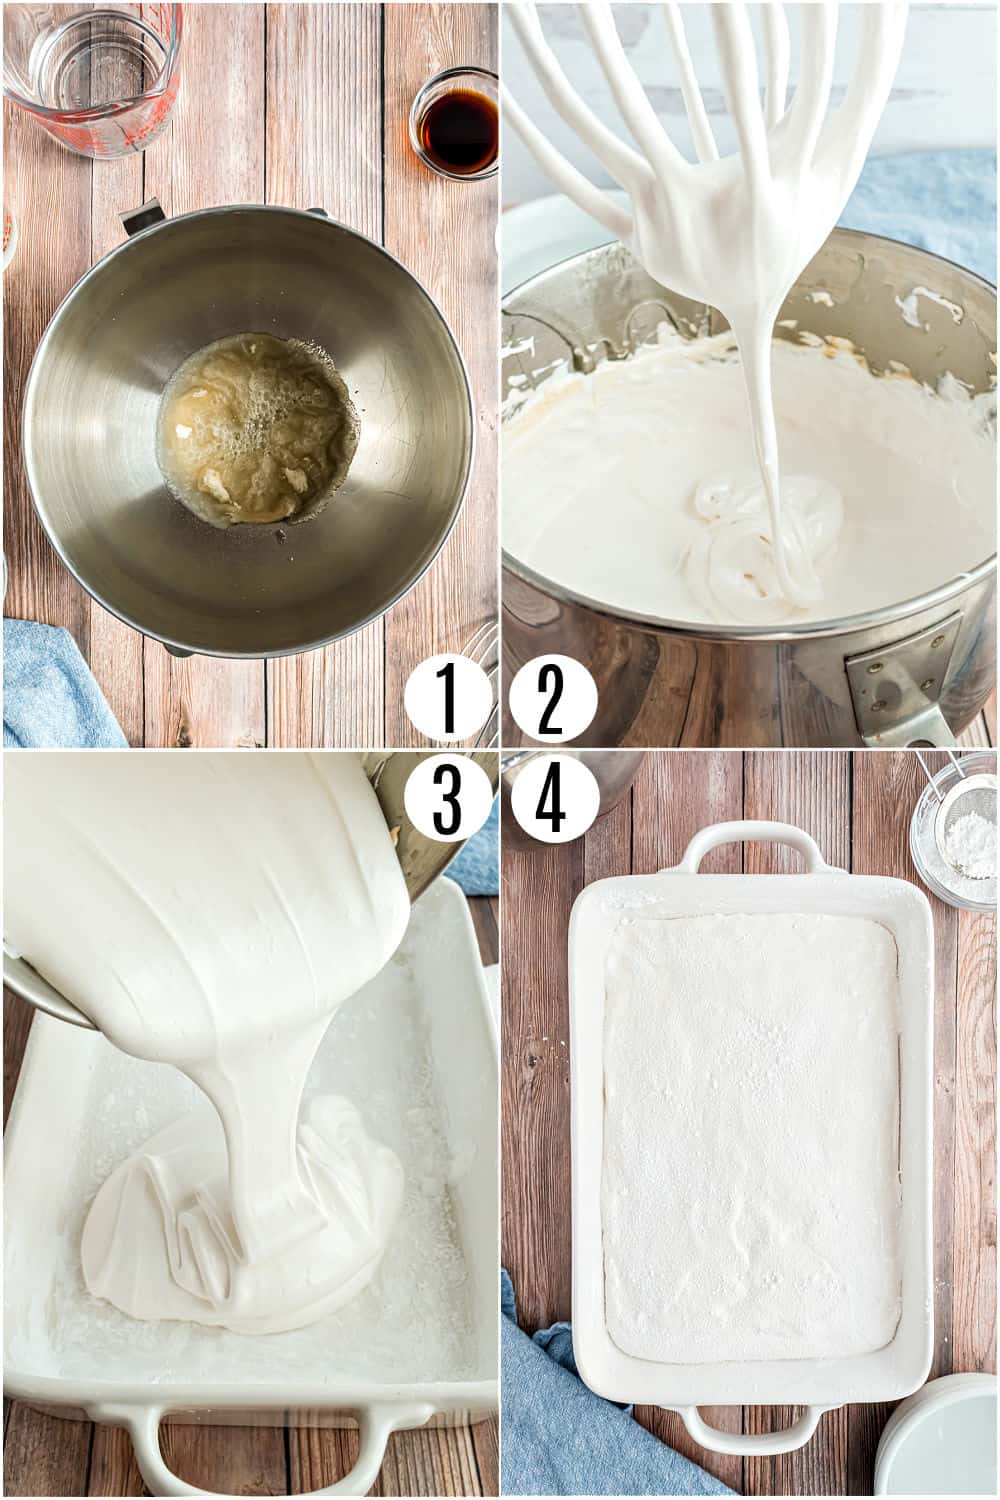 Step by step photos showing how to make homemade marshmallows.